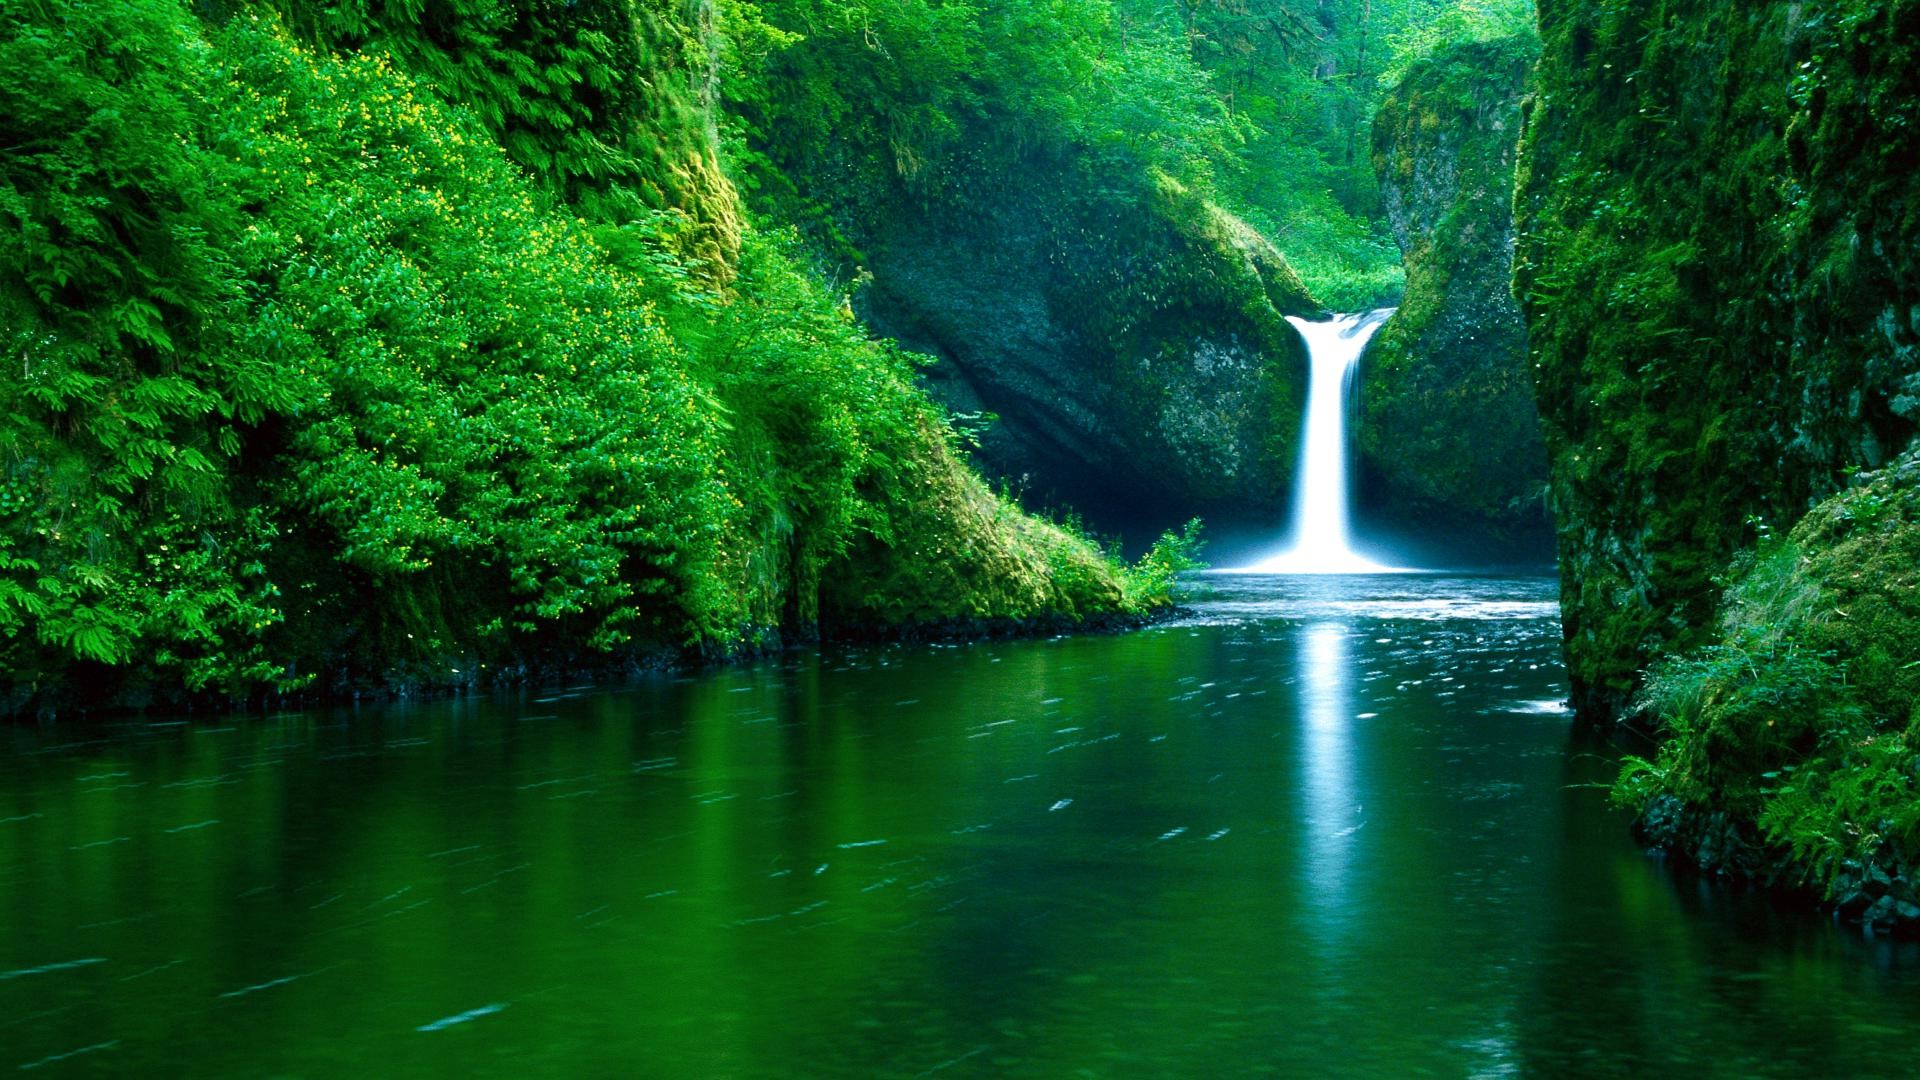 Waterfall, Water, Nature, Landscape, Green, River, Forest 